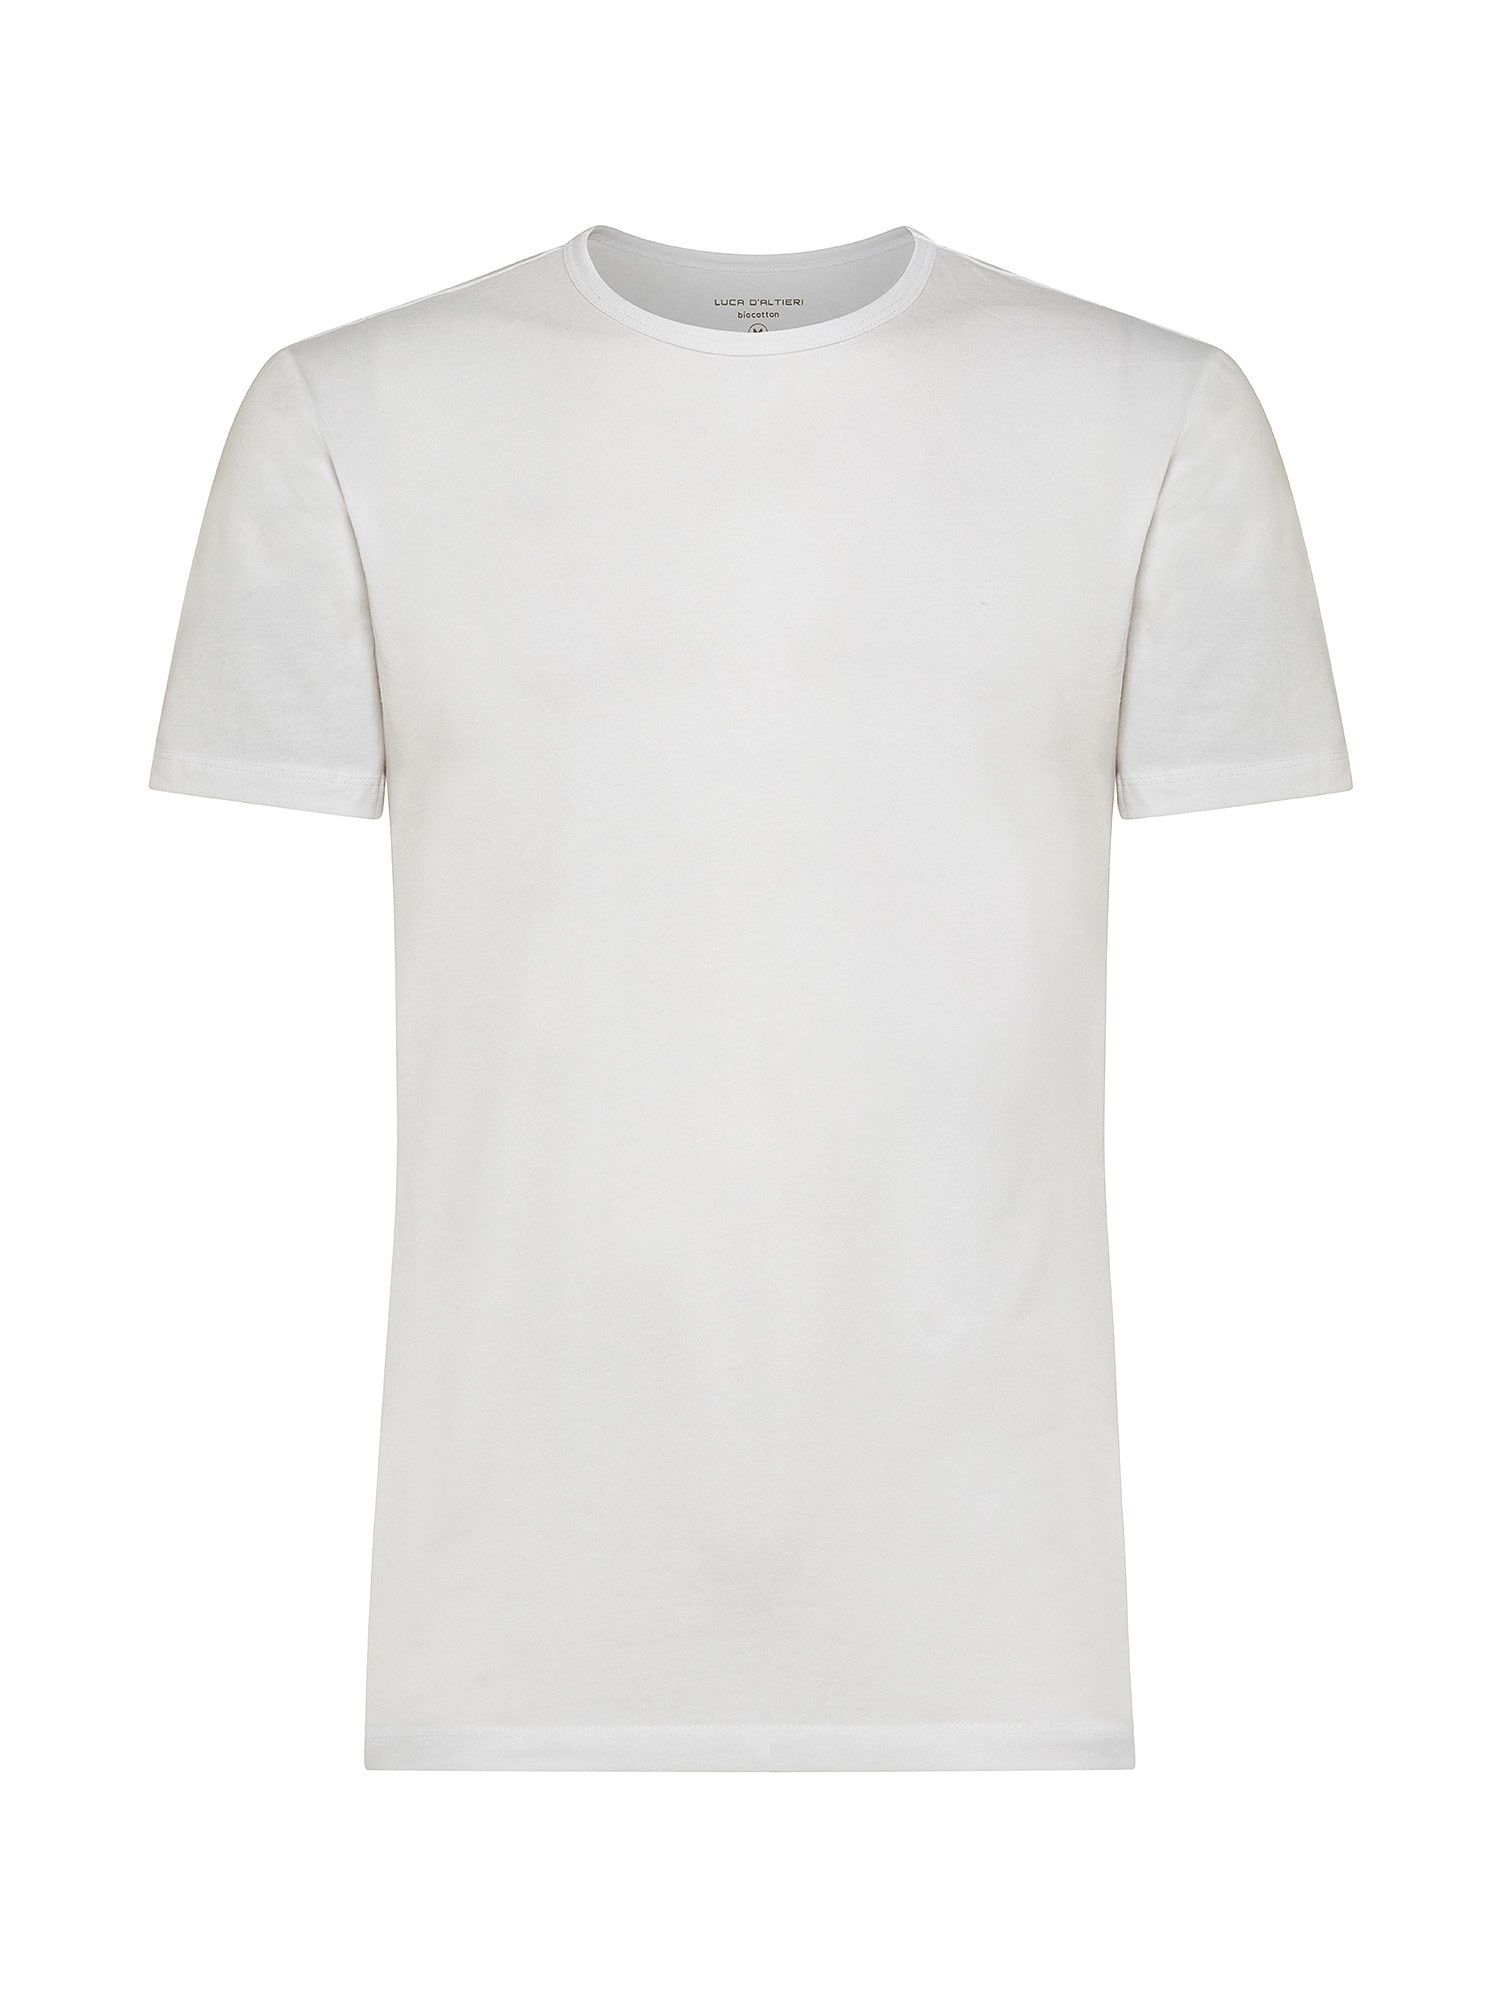 Luca D'Altieri - Set of 2 t-shirts, White, large image number 0